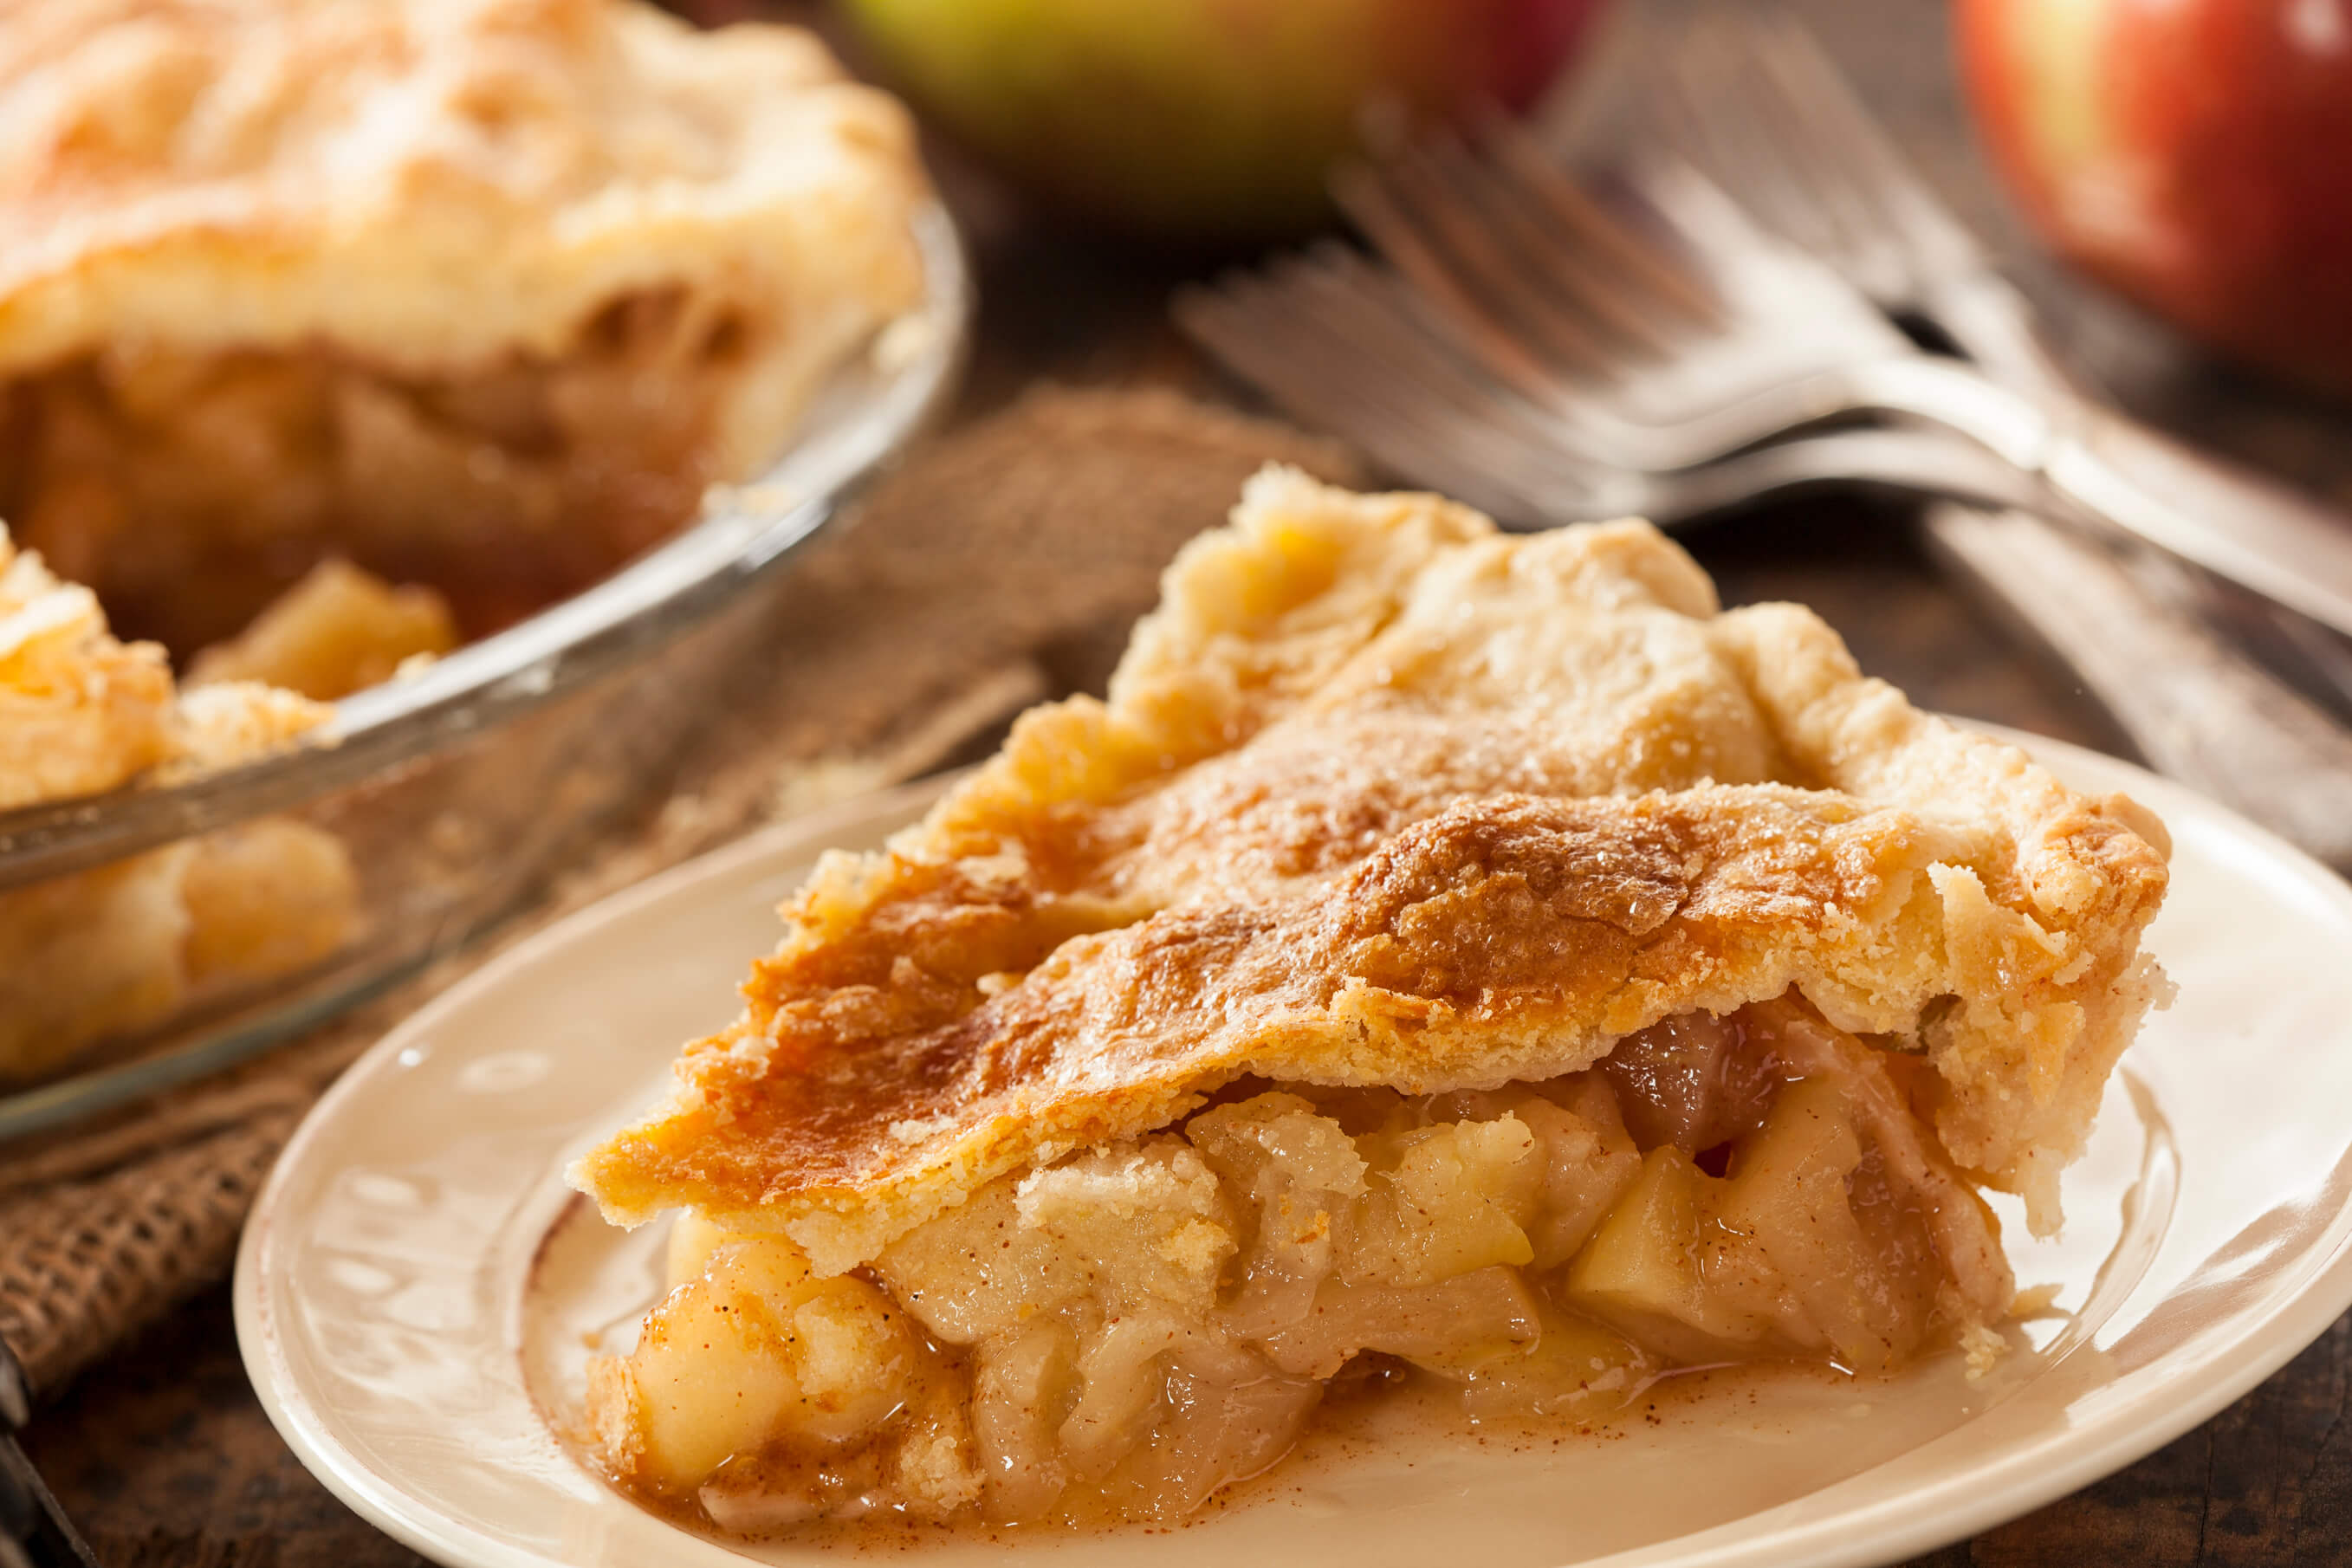 Best Apples for Pie | Apple for That